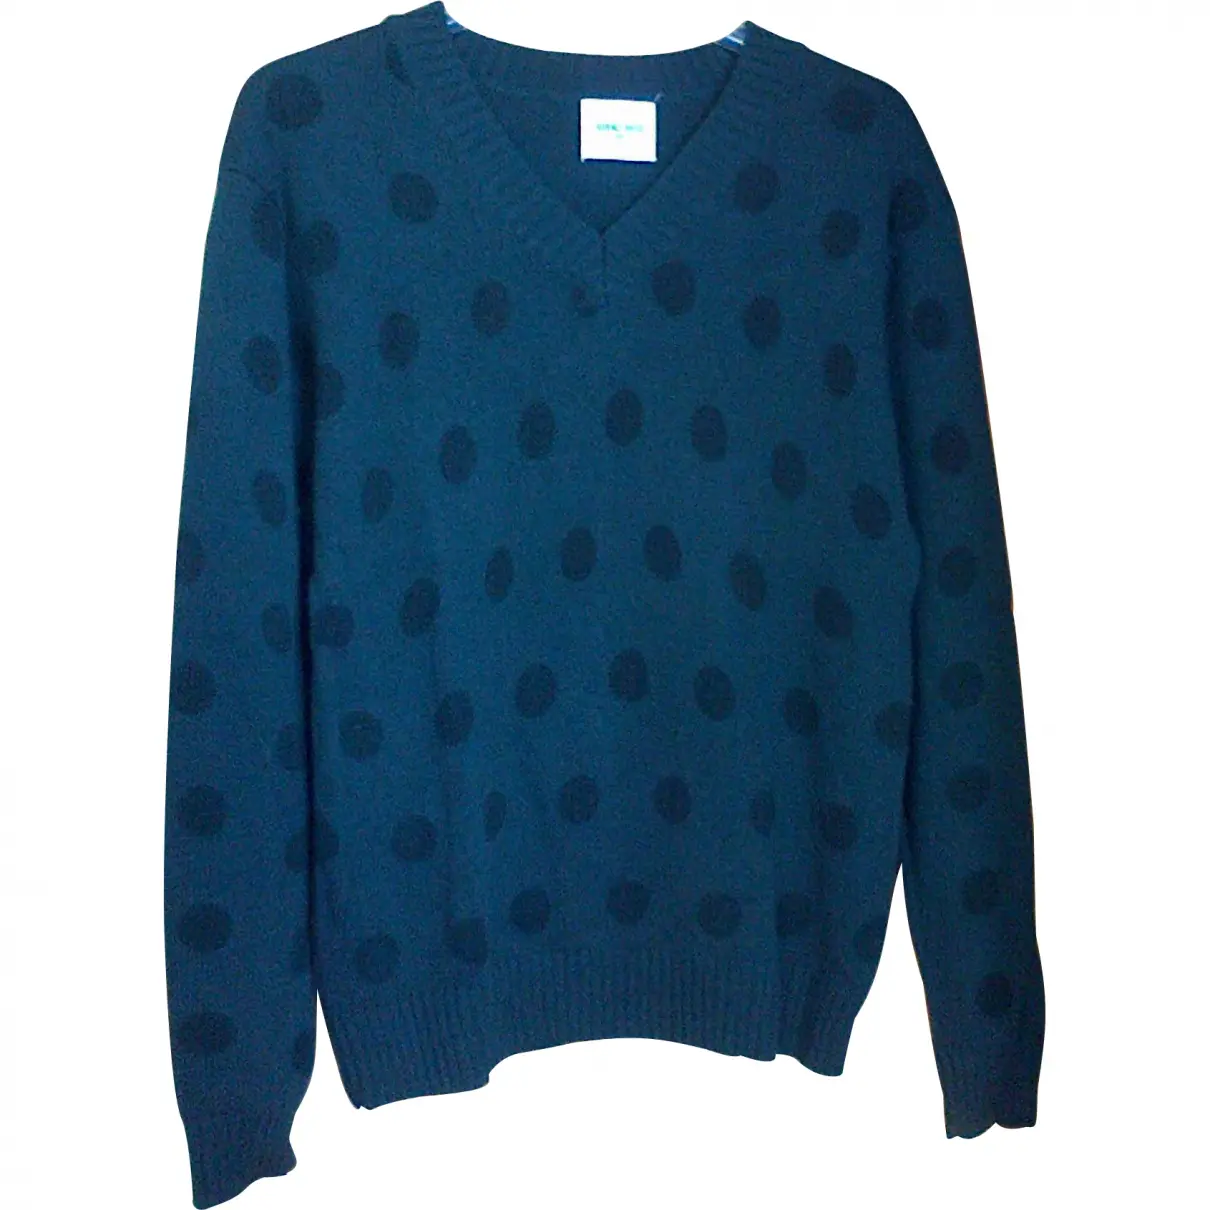 SWEATER Laurence Dolige